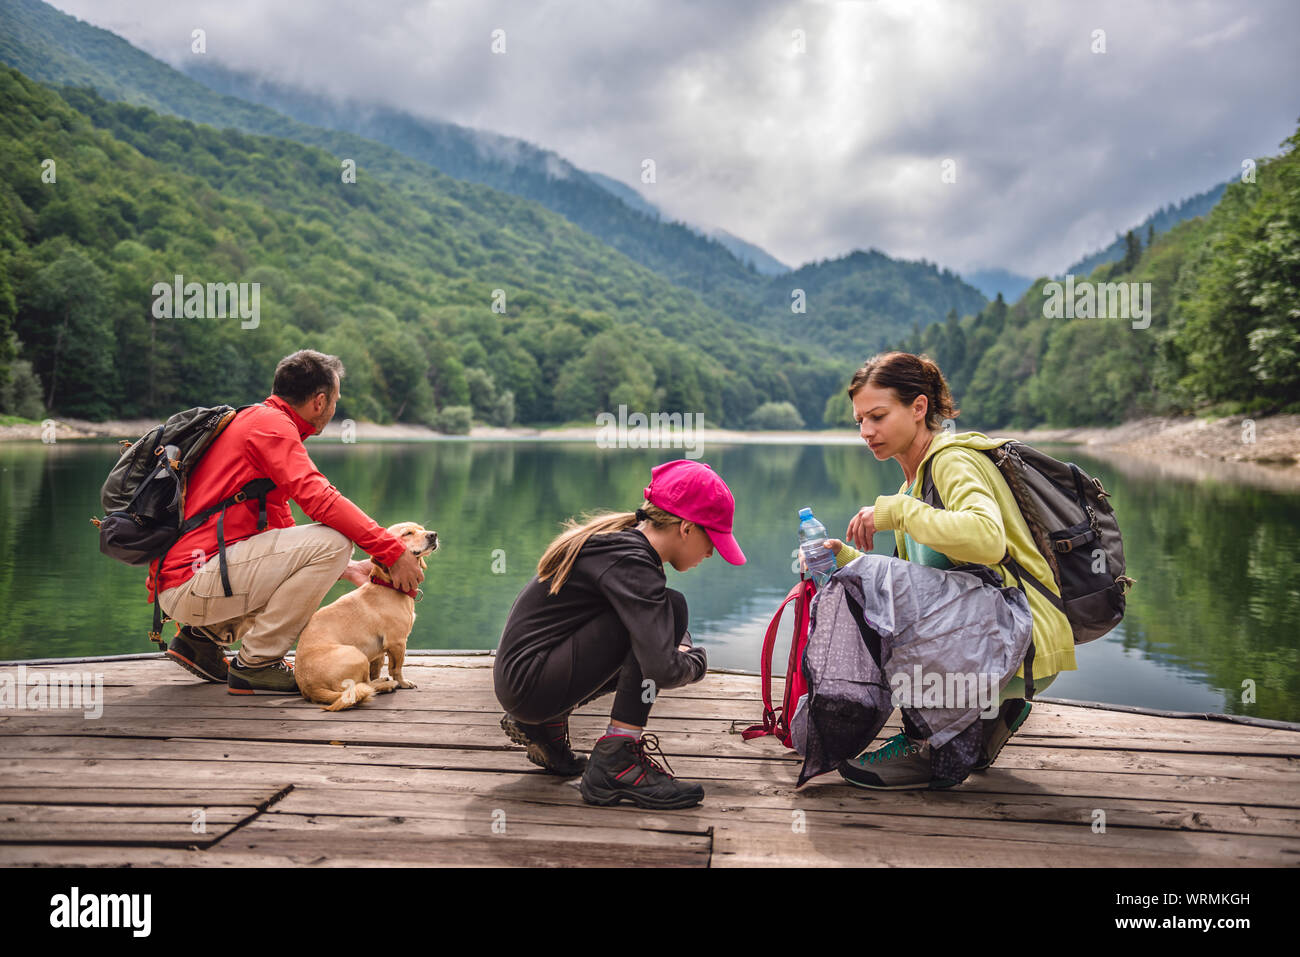 Family with small yellow dog resting on a pier by the lake and foggy mountains Stock Photo